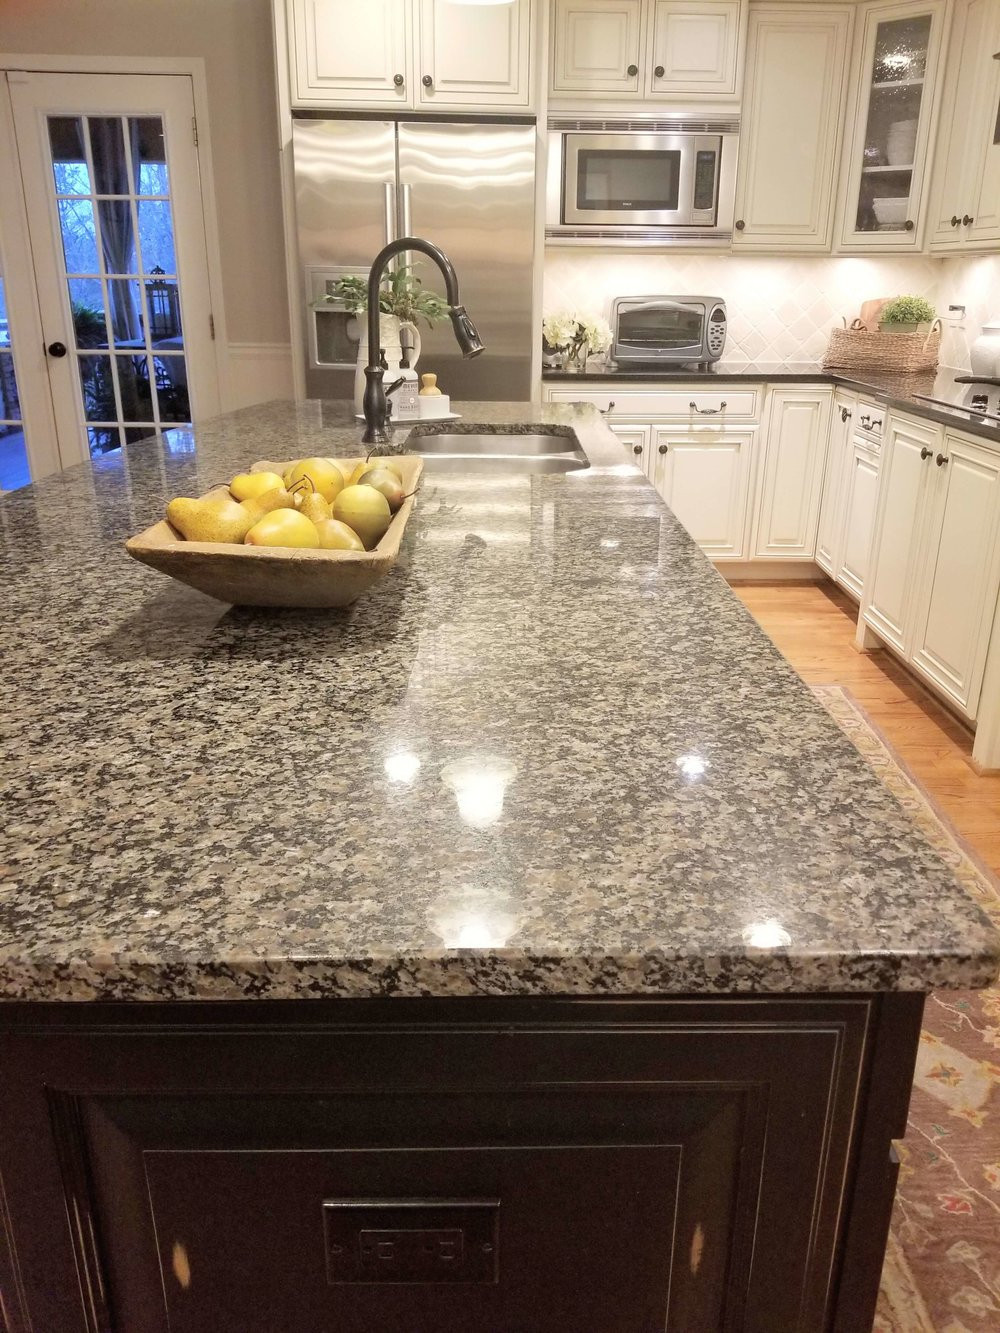 Kitchen Island With Granite Countertop
 How A Simple Kitchen Island Countertop Change Can Totally